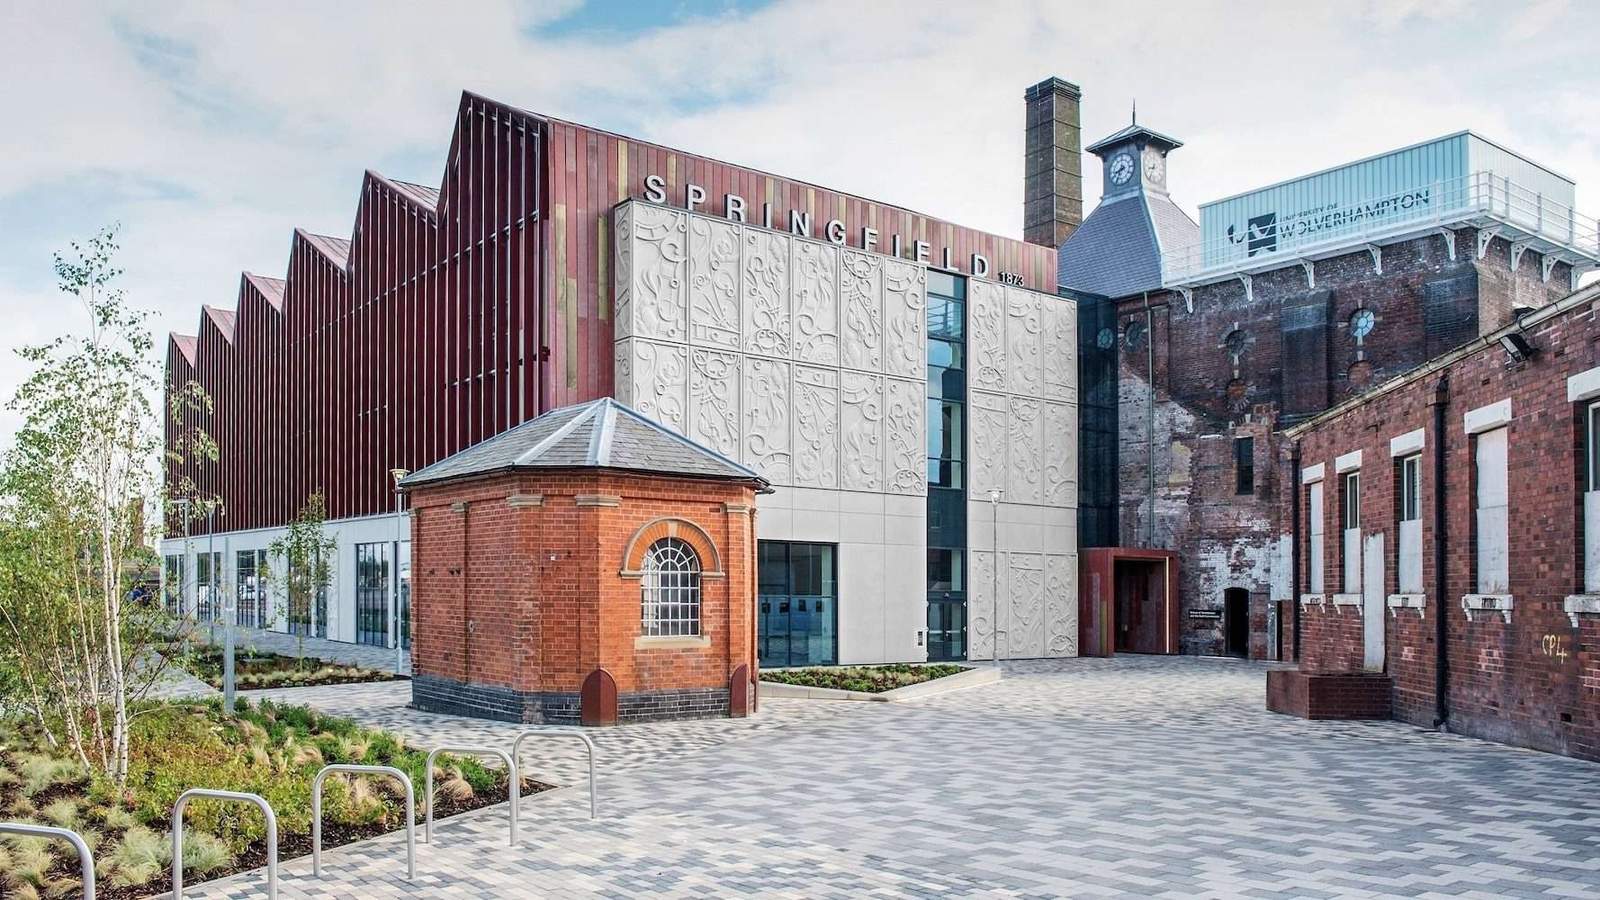 RIBA Reveals Shortlist for New Award Recognizing Adaptive Reuse Projects